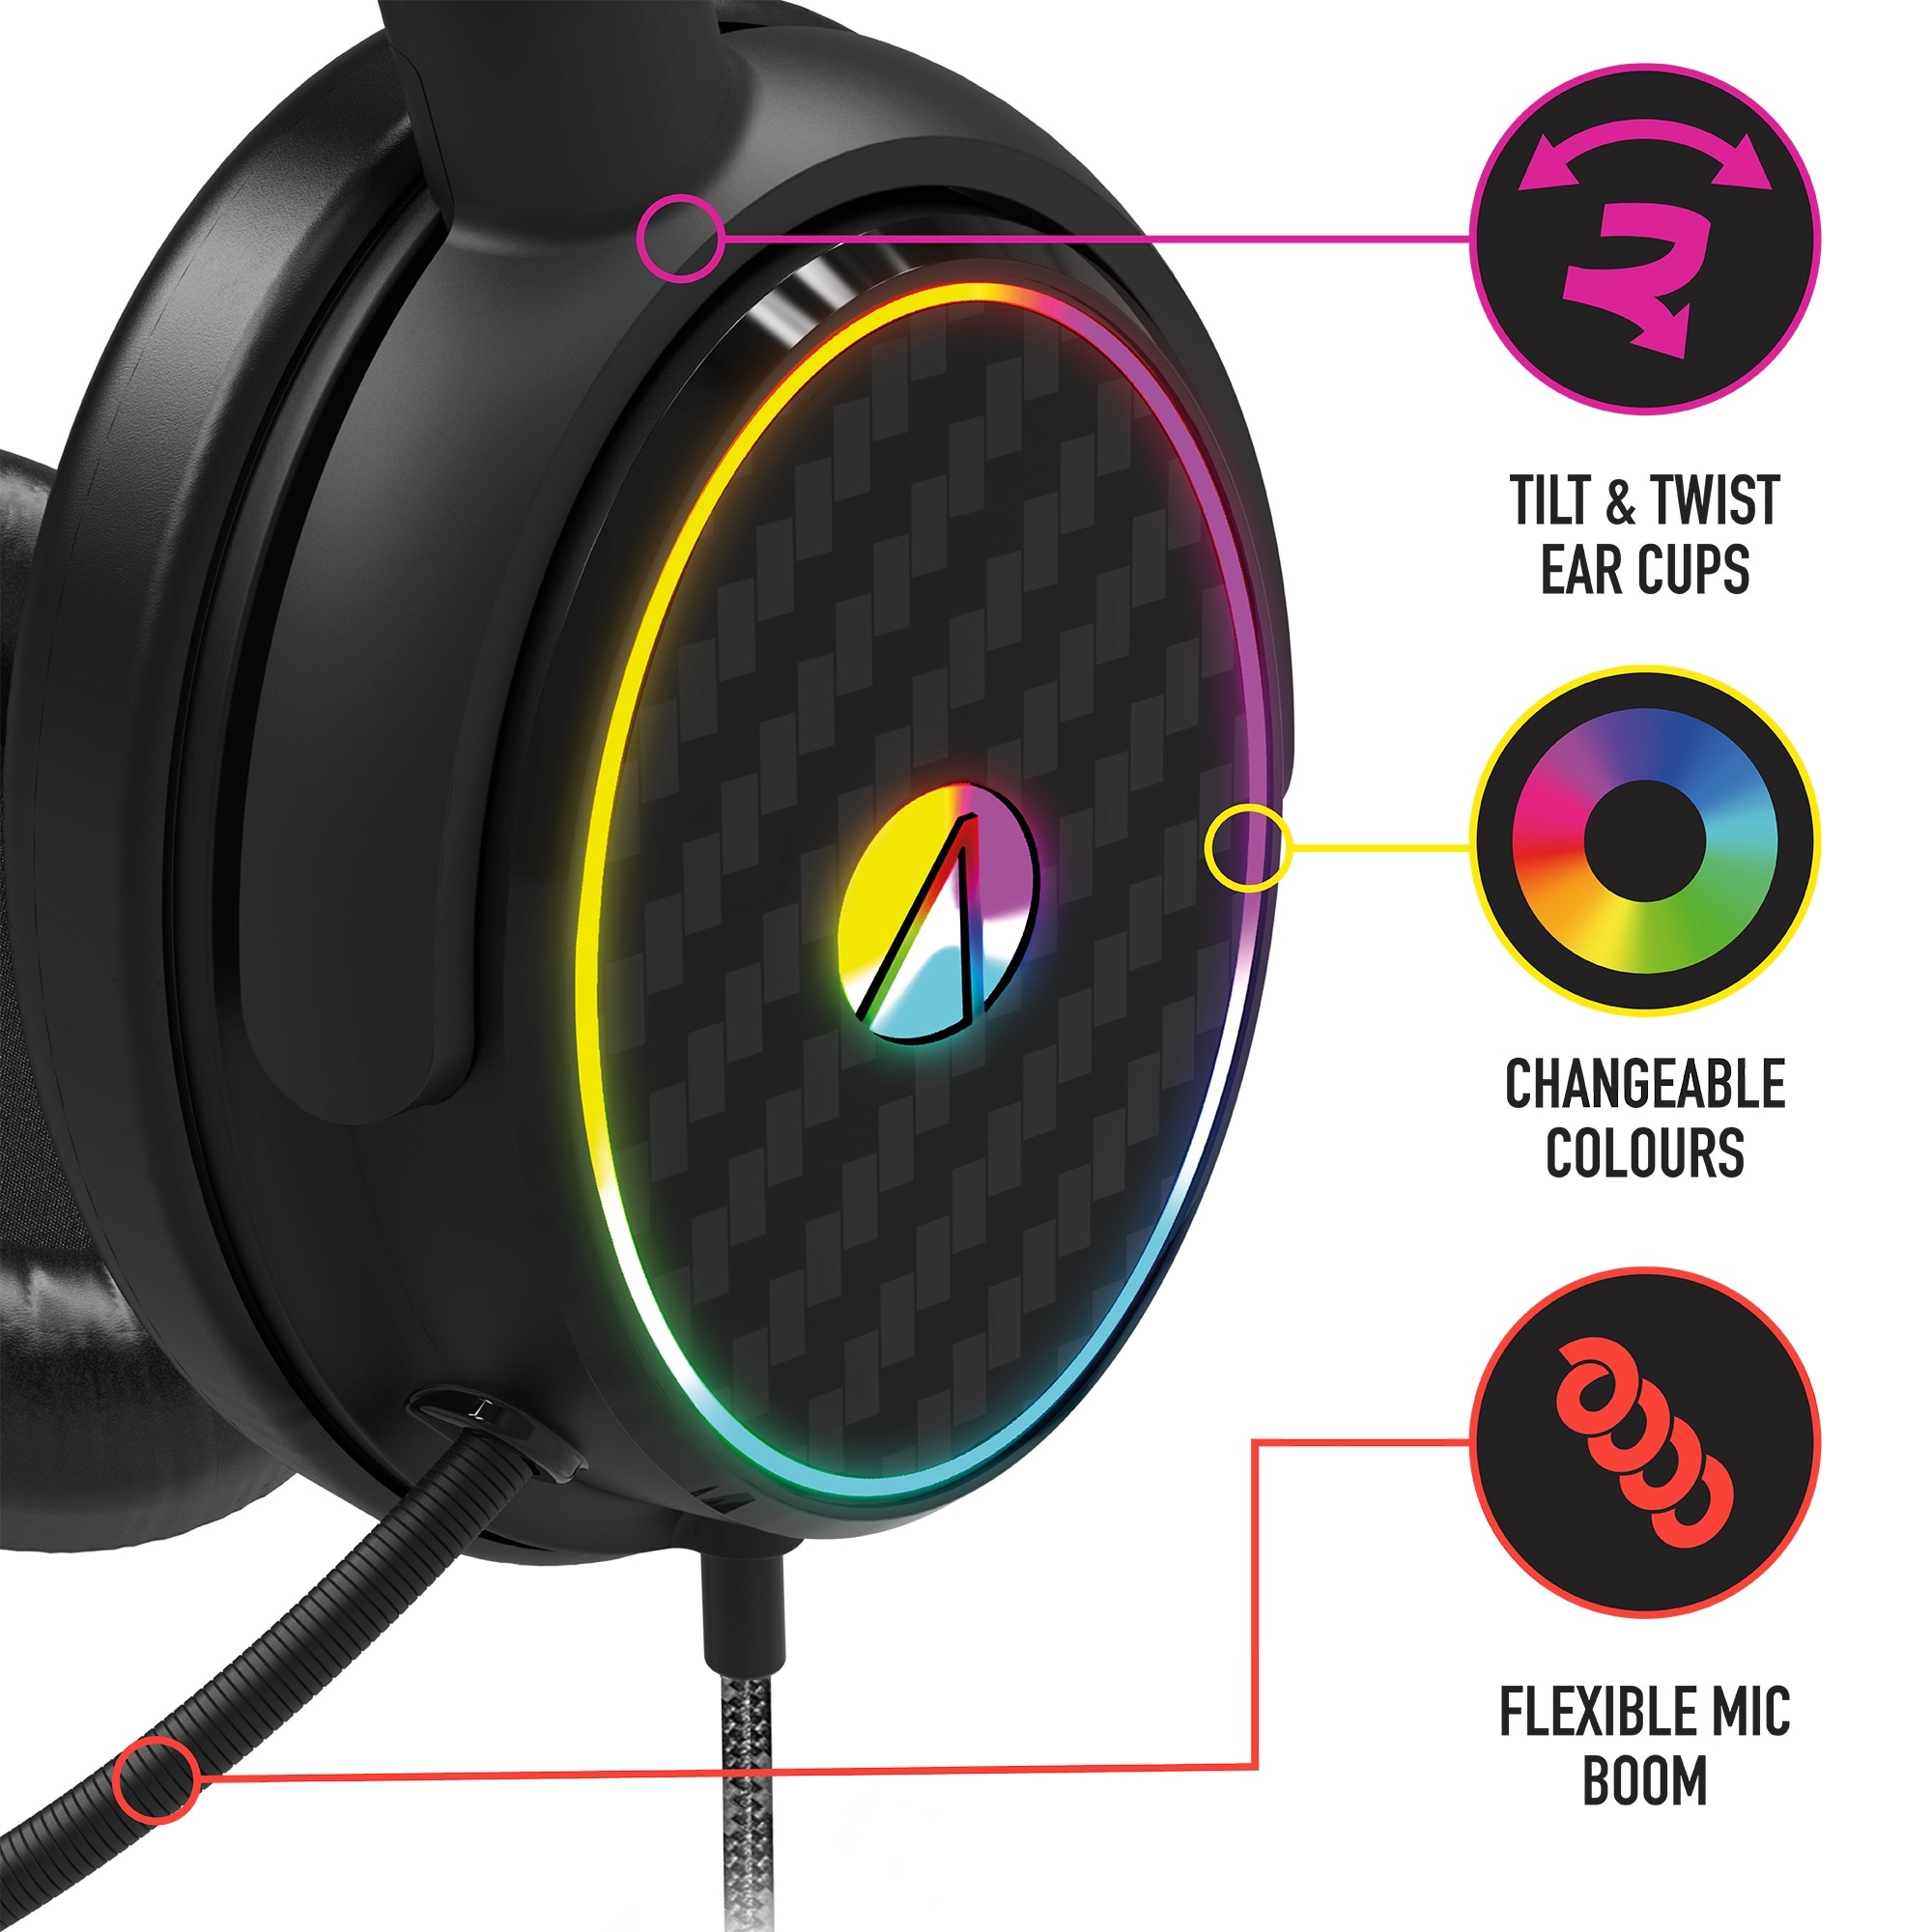 online Beleuchtung«, Stealth kaufen LED | Plastikfreie Verpackung C6-100 Gaming »Stereo UNIVERSAL Gaming-Headset Headset mit